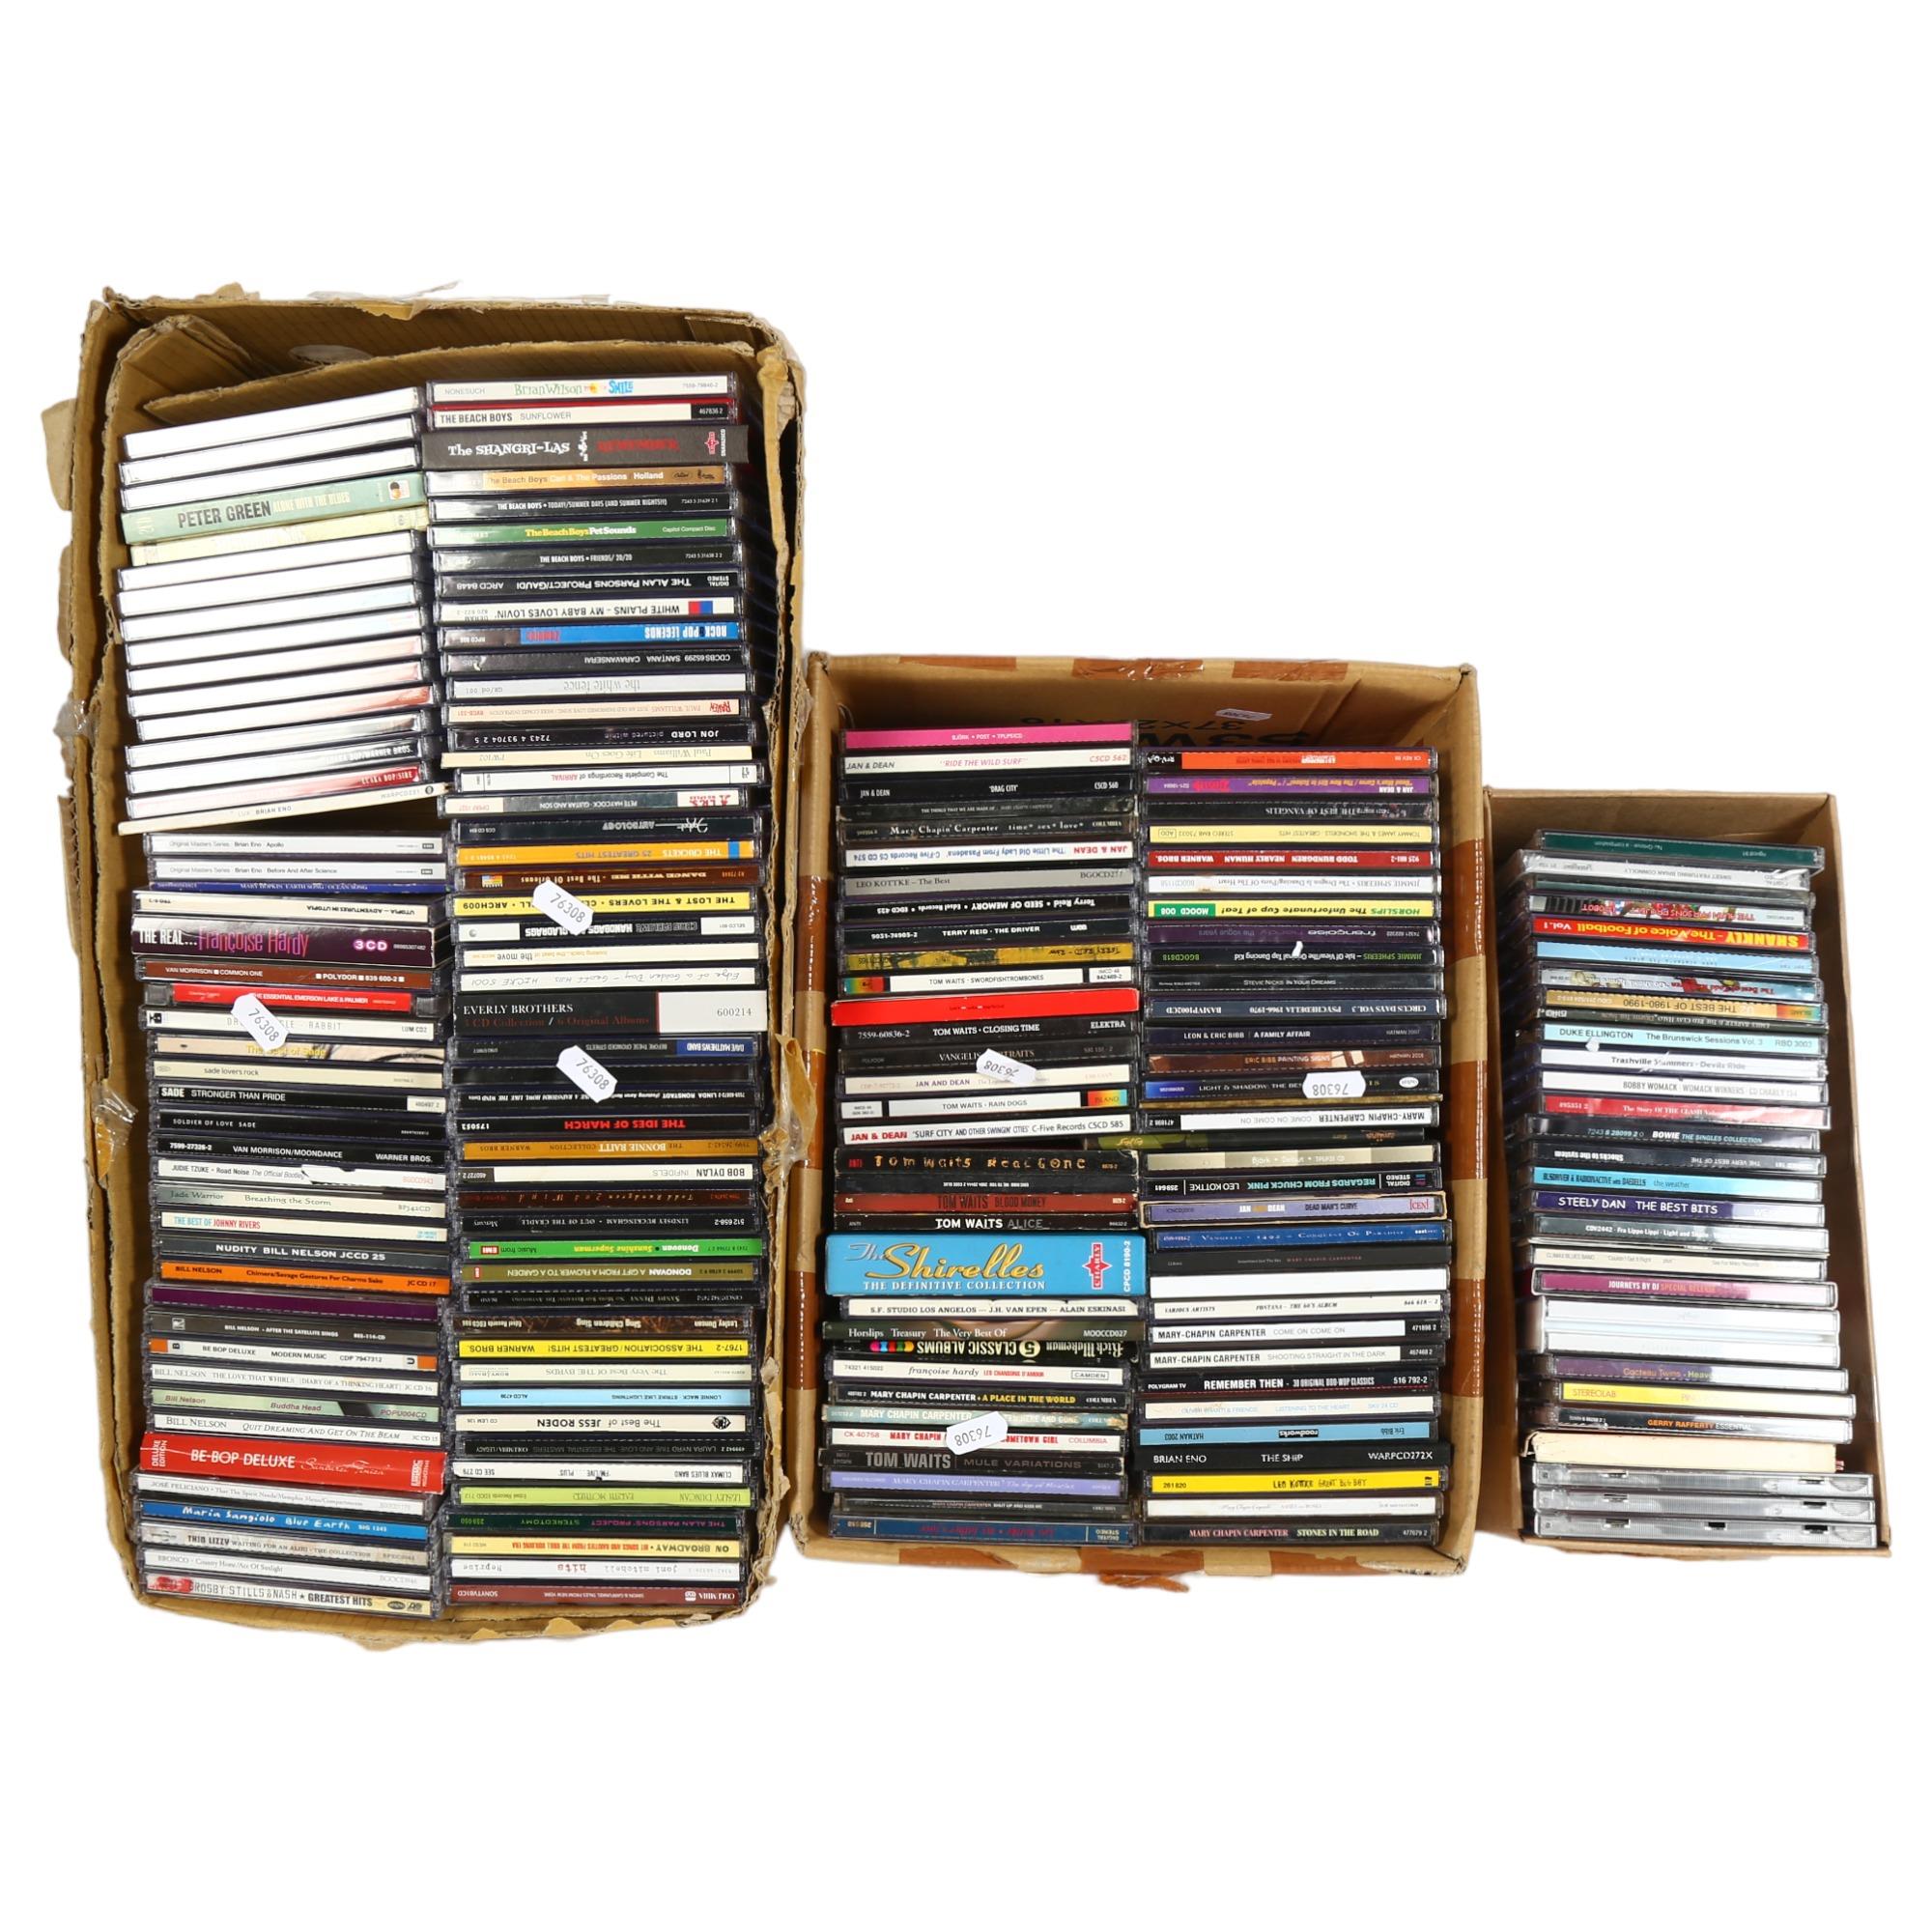 A large quantity of CDs, all re-cased in new Jewel cases, including such genres as Northern Soul,